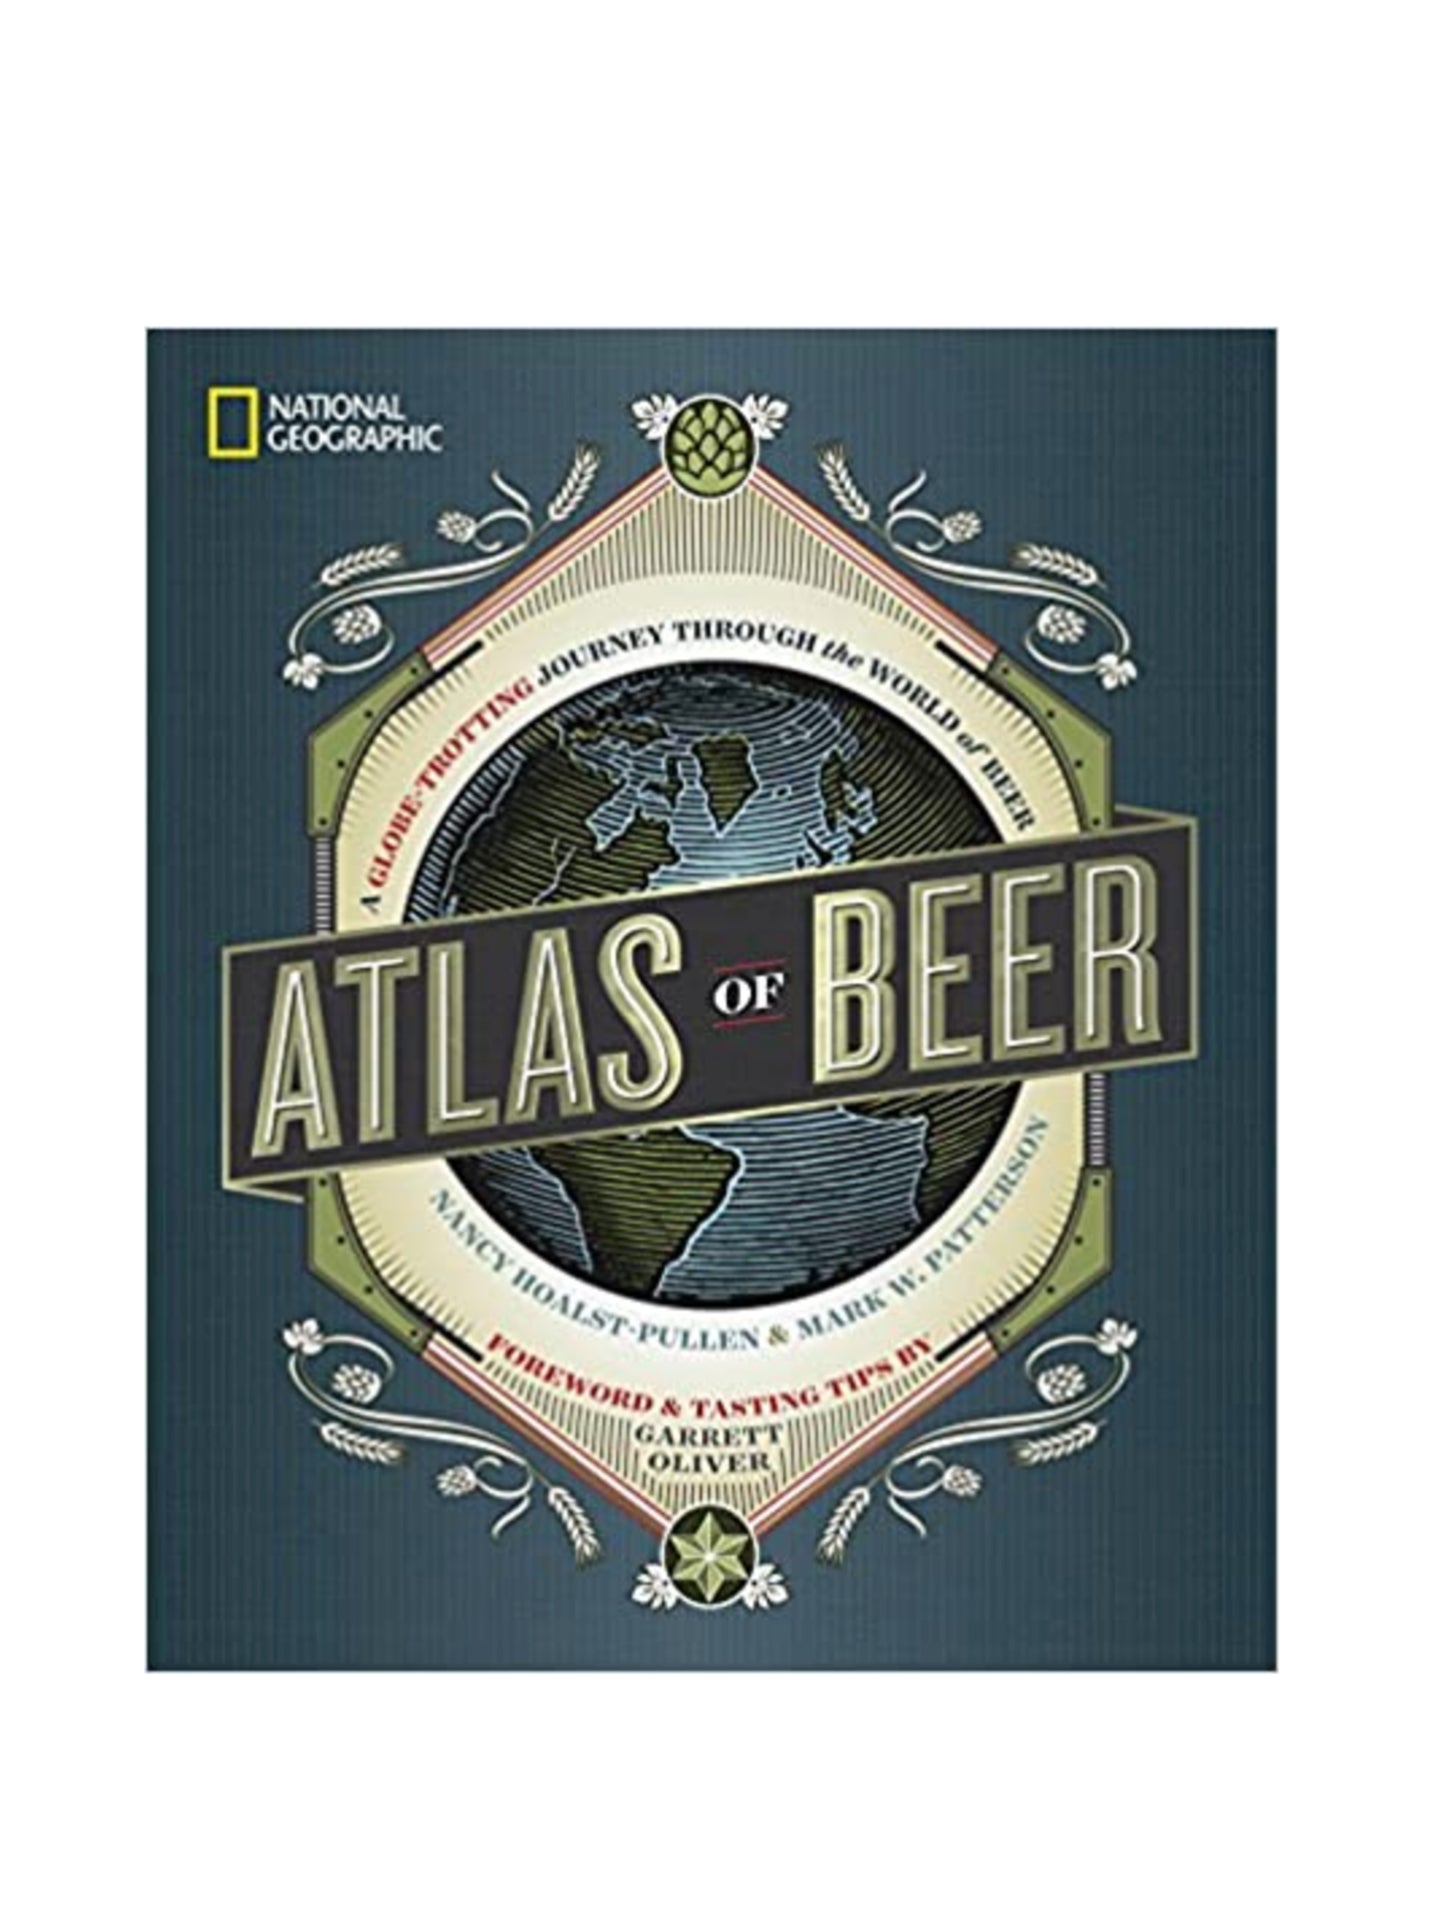 National Geographic Atlas of Beer: A Globe-Trotting Journey Through the World of Beer Weston Table